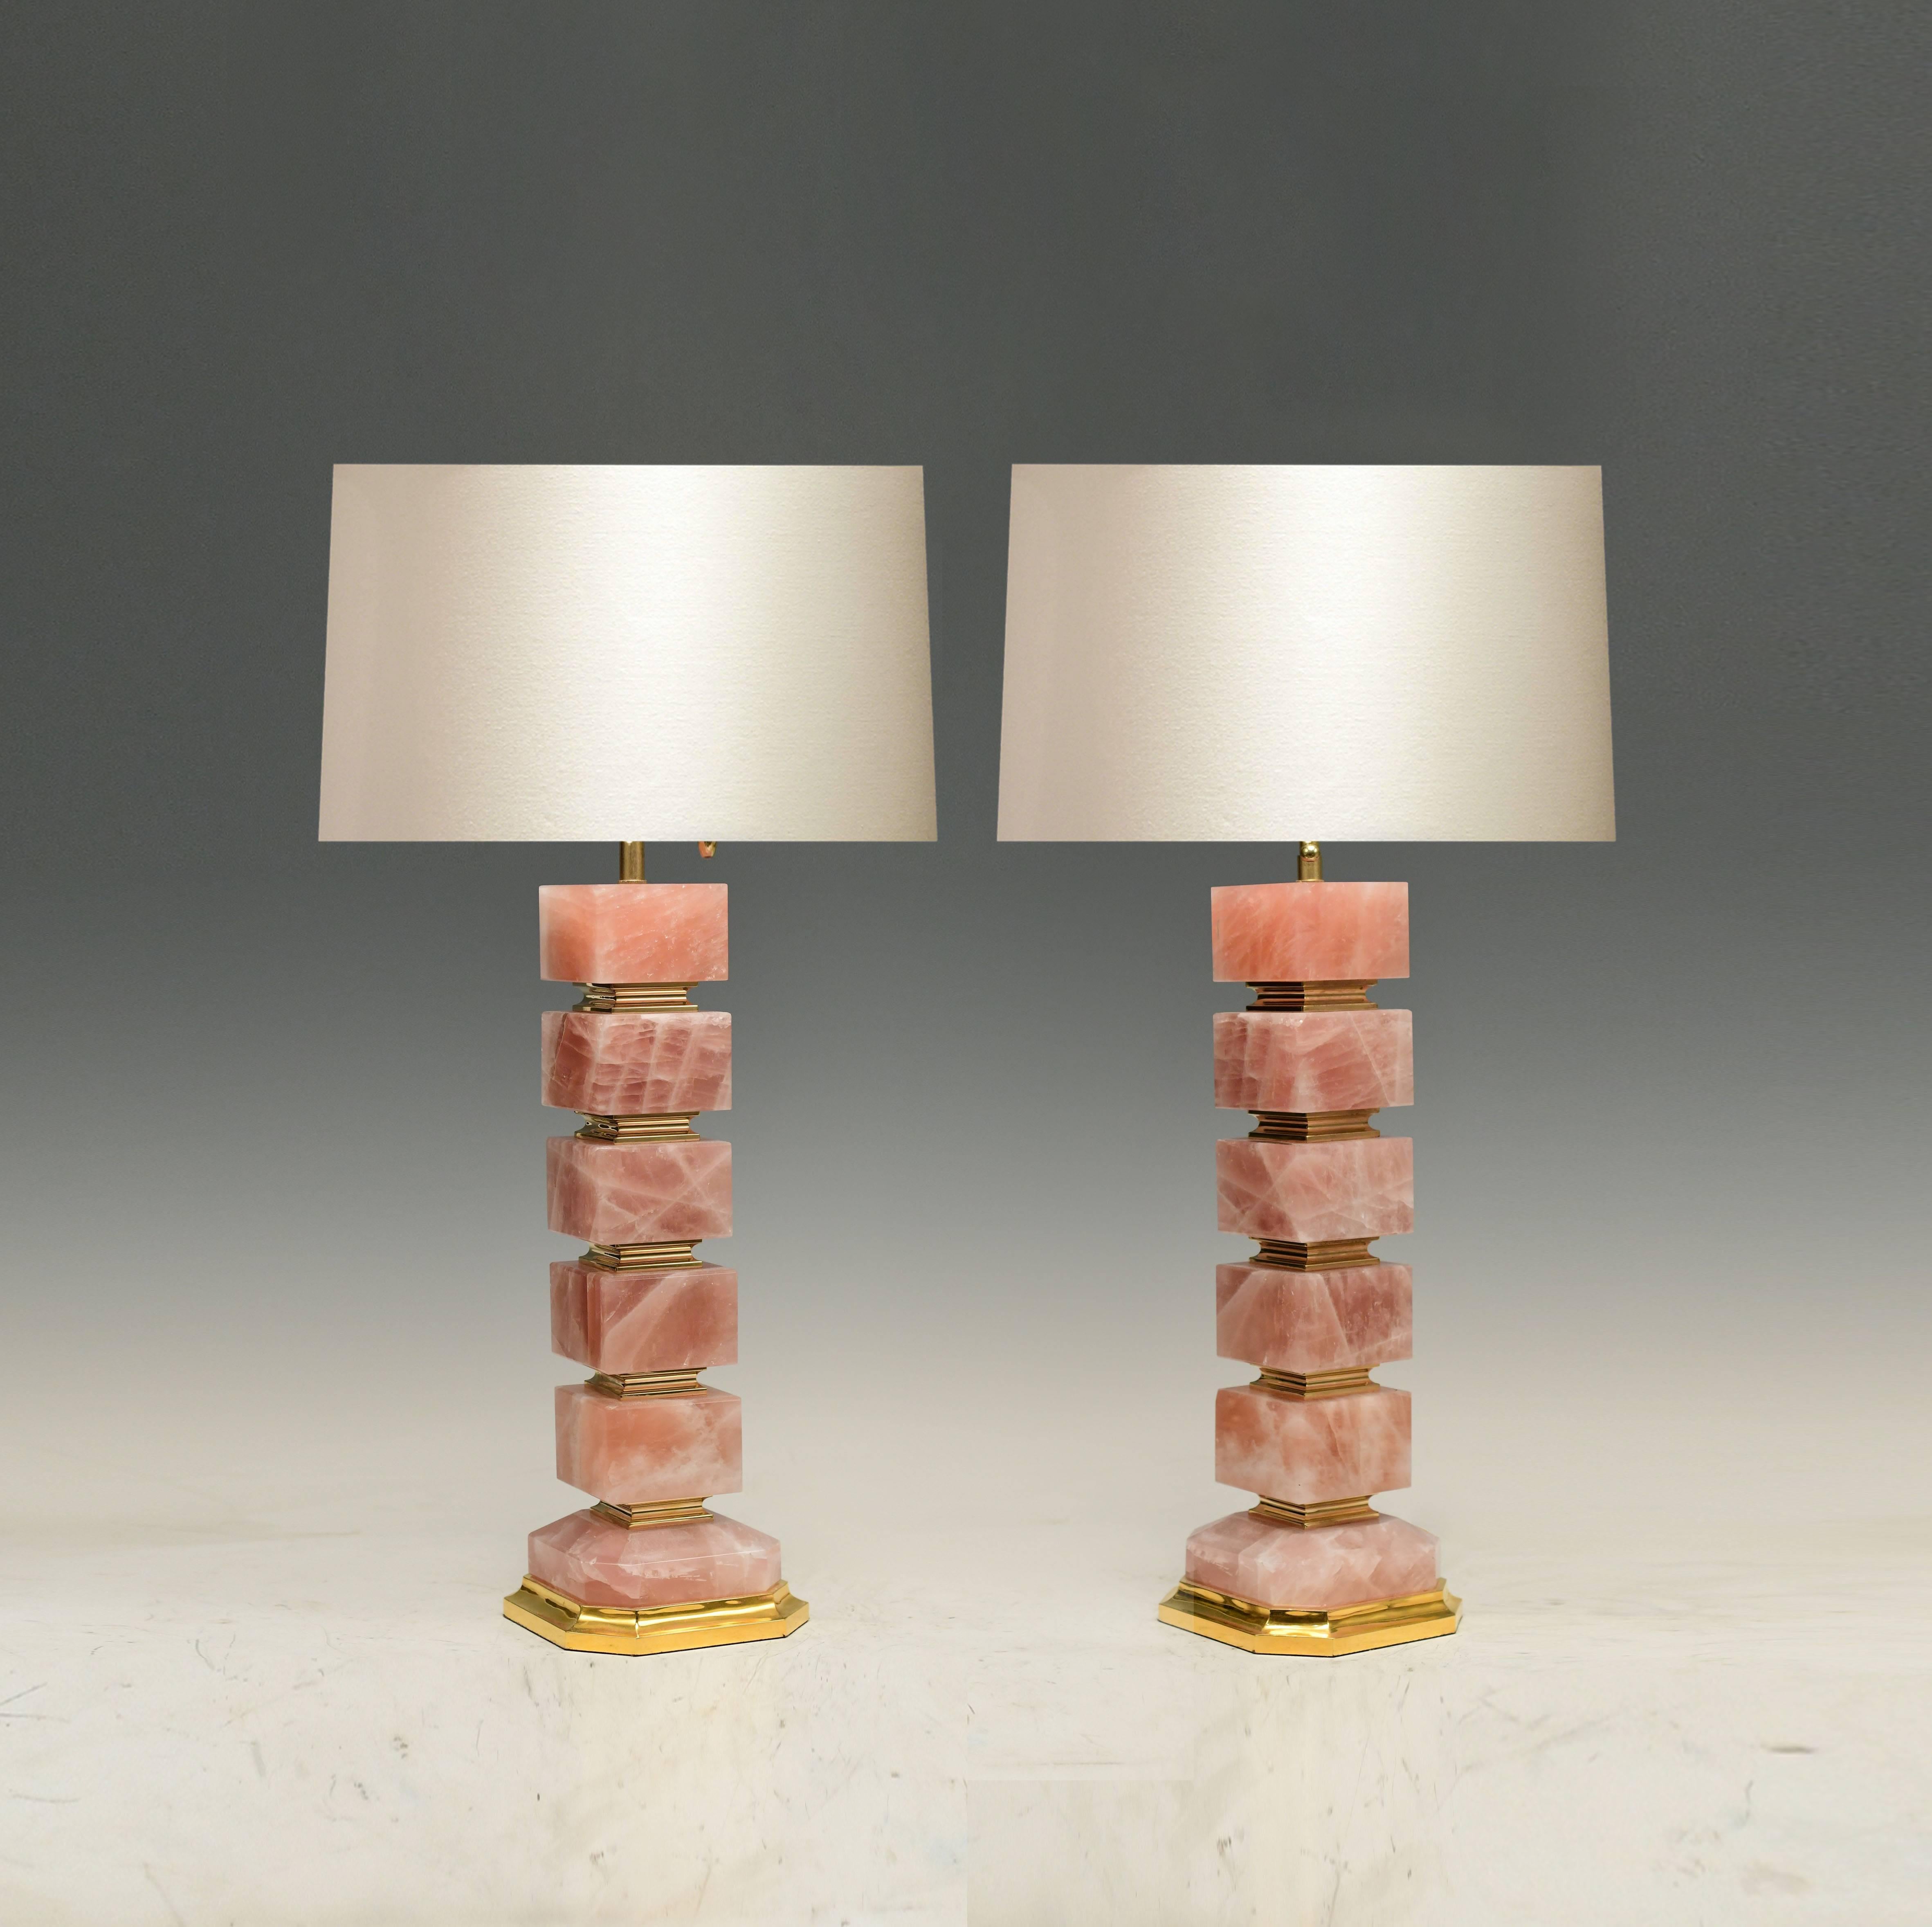 A pair of rose quartz rock crystal table lamps with polish brass base and insert decorations. By Phoenix Gallery NYC.
The height to the top of the rock crystal is 18.5